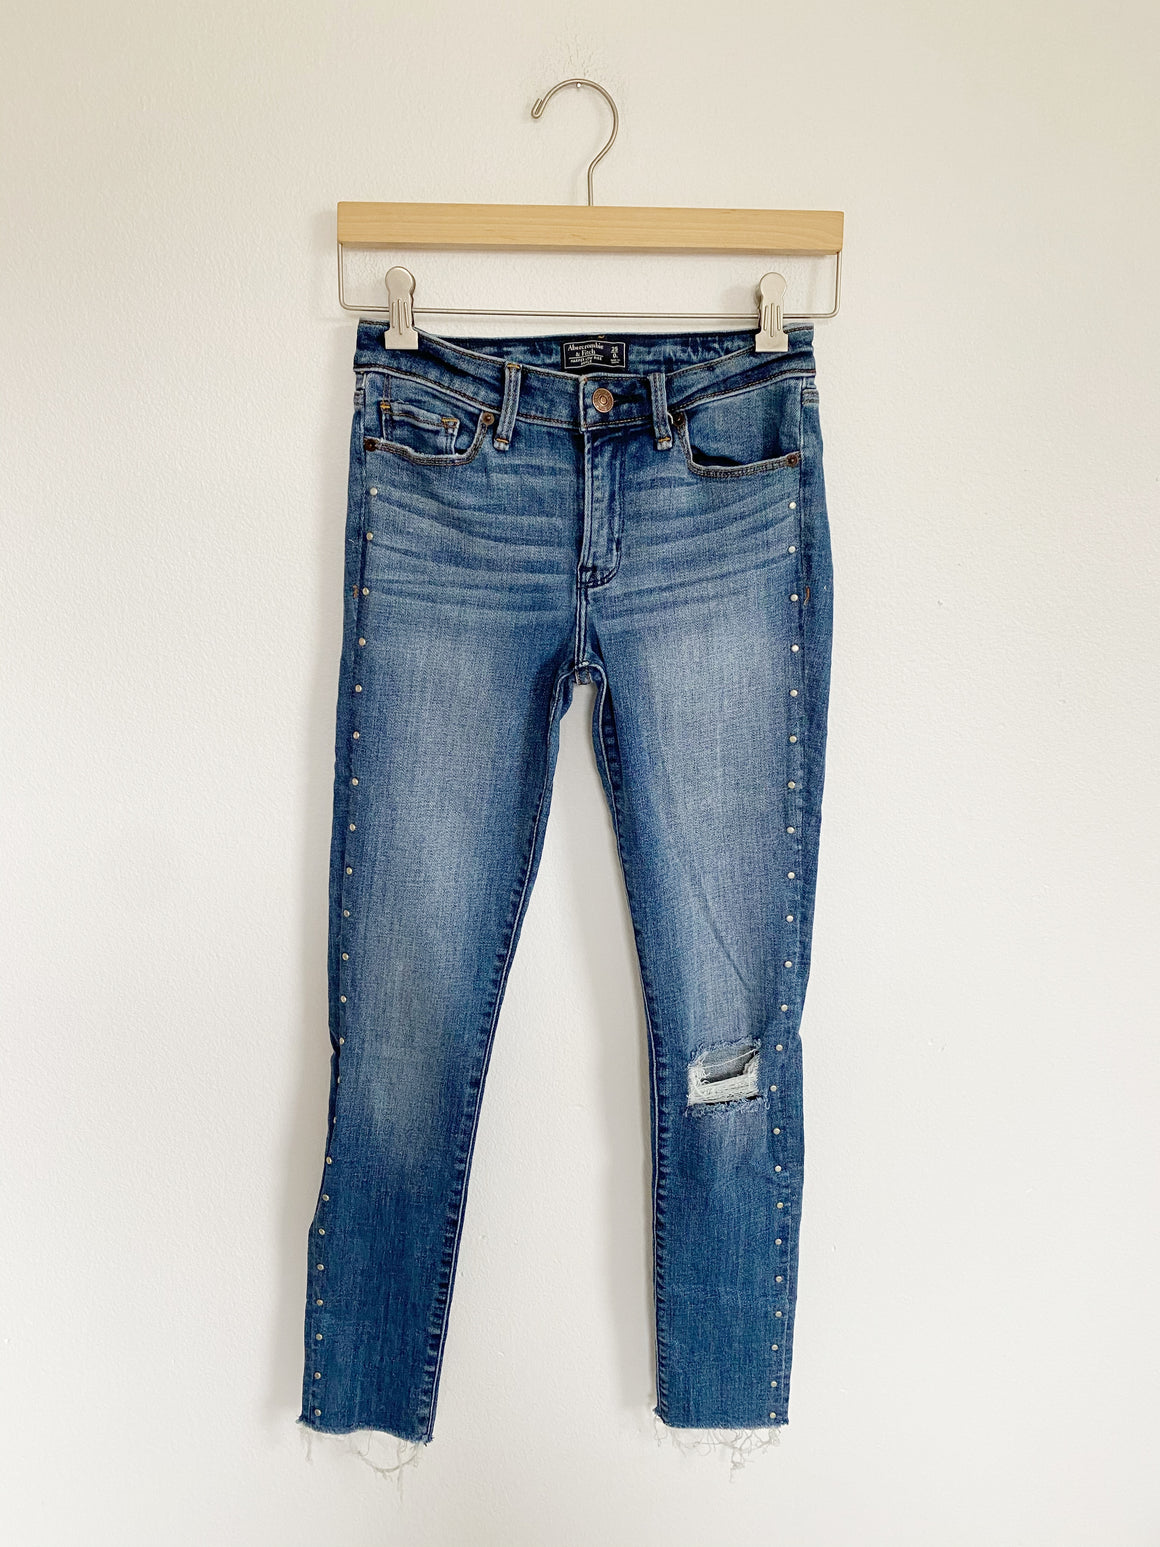 Abercrombie & Fitch Harper Ankle Jeans 25 waist / 0 – Fashion Trade Bo ...